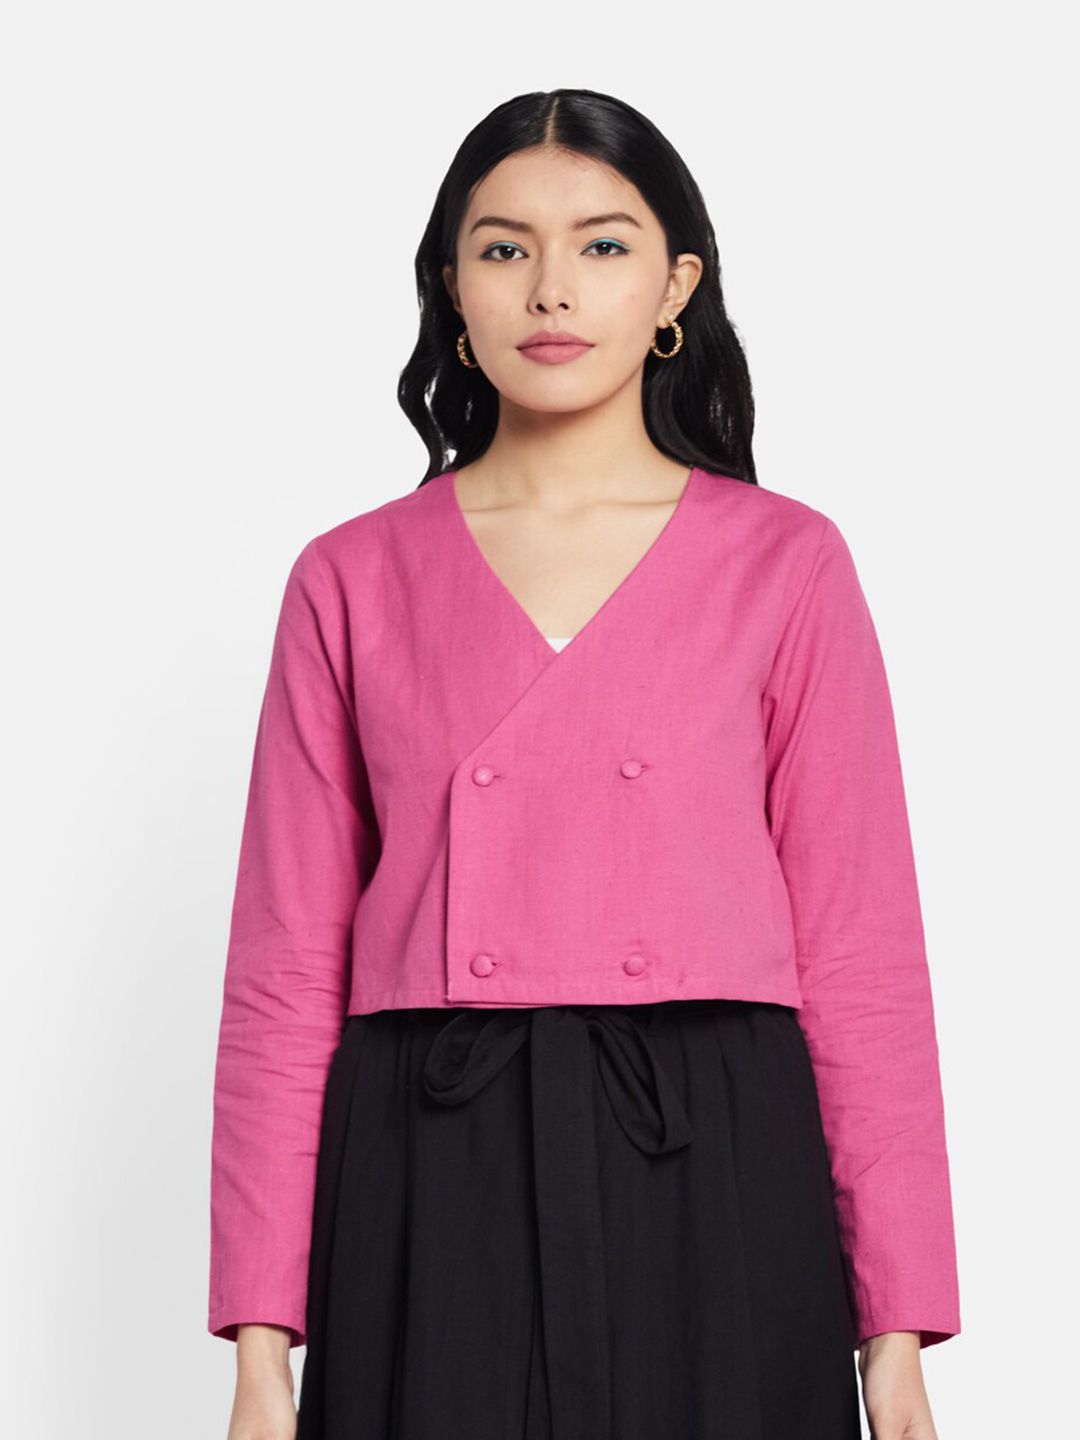 Fabindia V-Neck Shirt Style Top Price in India